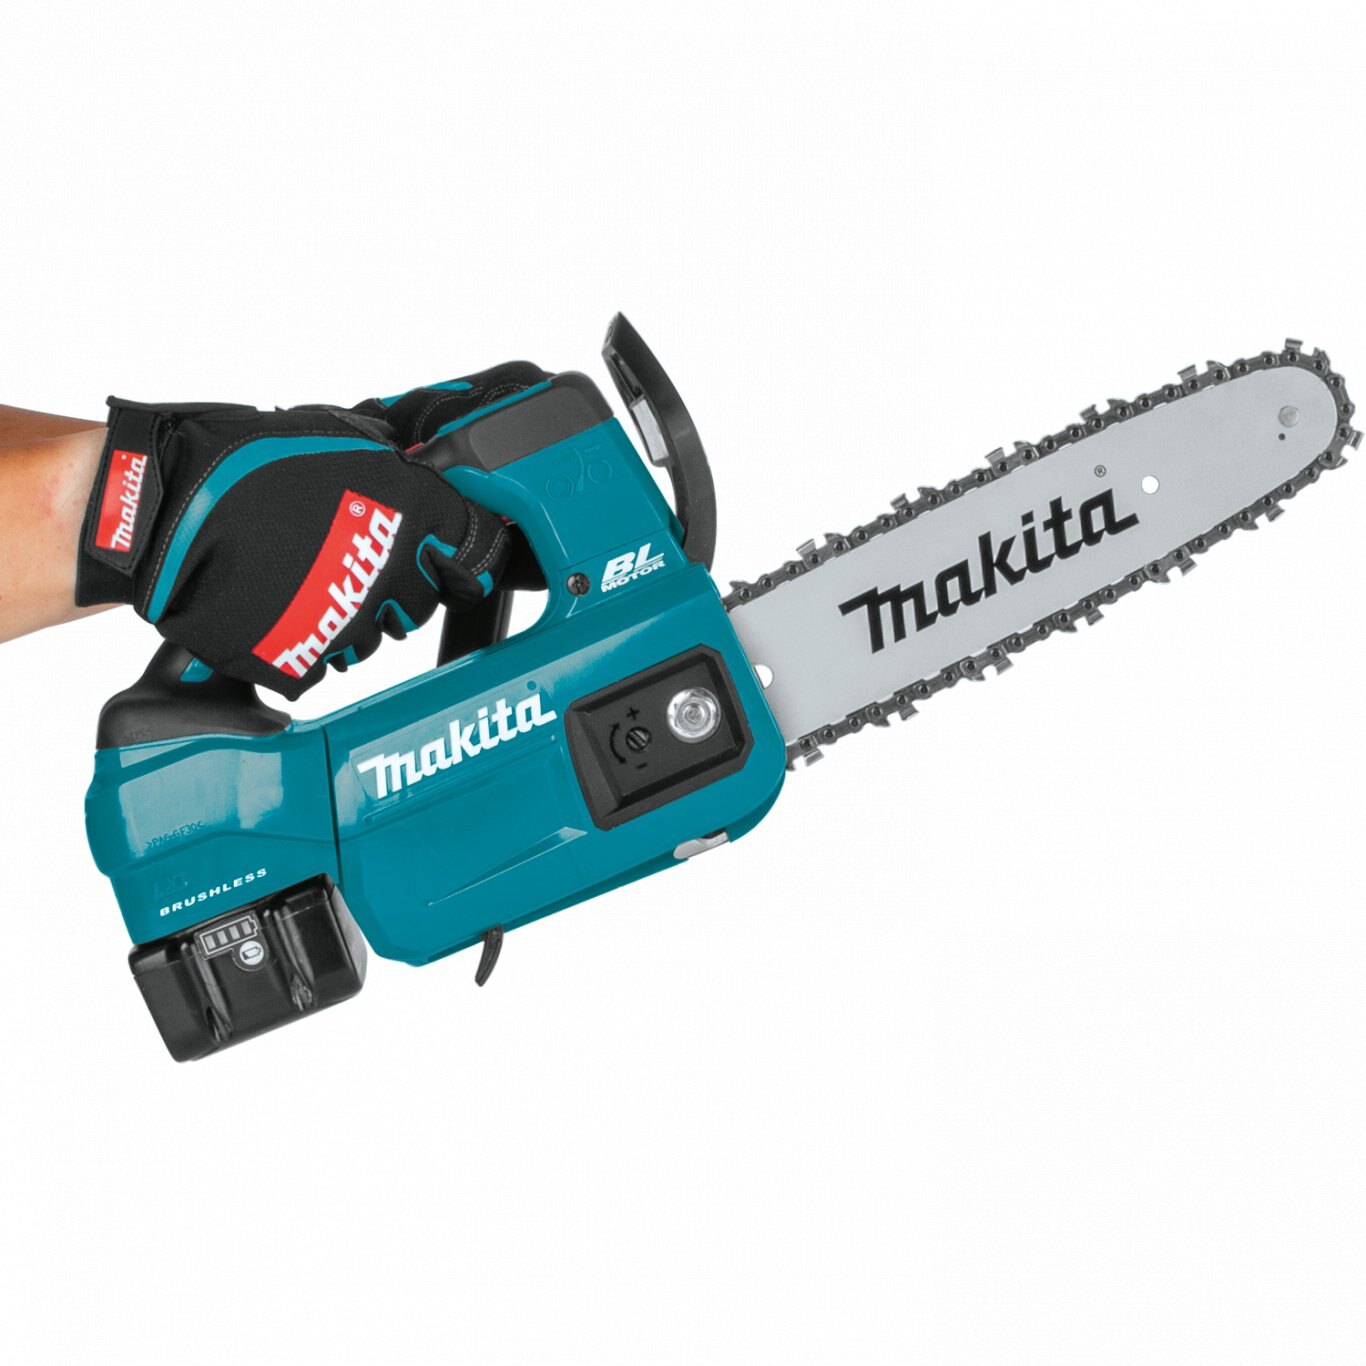 Makita 18V LXT® Lithium?Ion Brushless Cordless 10 Top Handle Chain Saw Kit (4.0Ah)